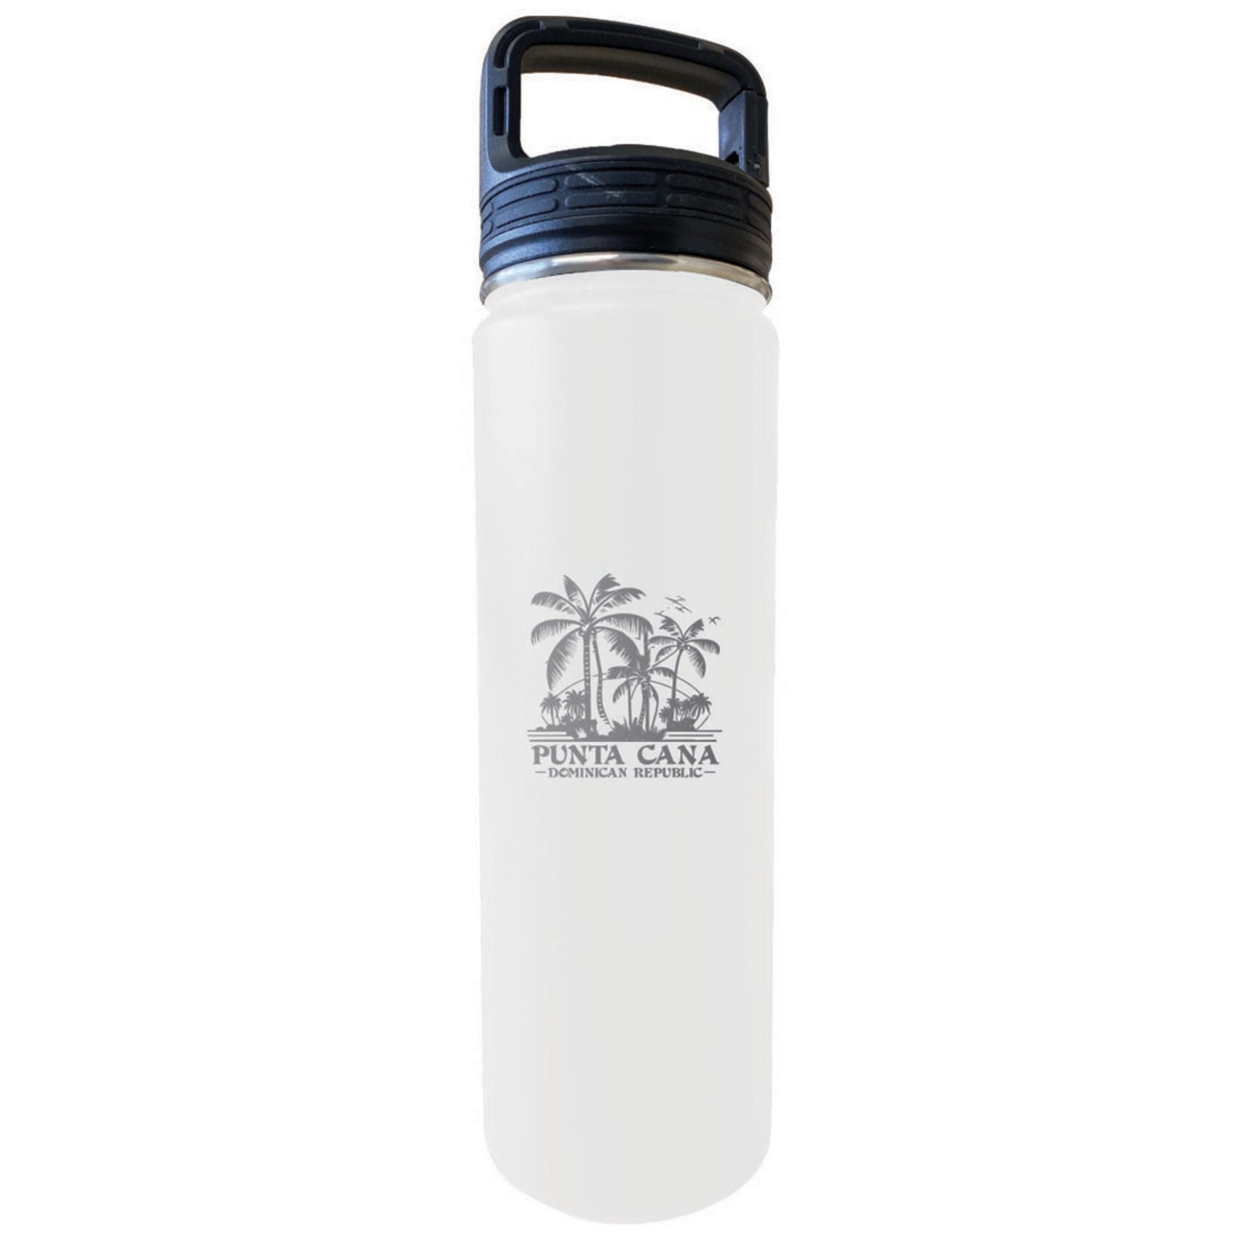 Punta Cana Dominican Republic Souvenir 32 Oz Insulated Stainless Steel Tumbler - White, Palm